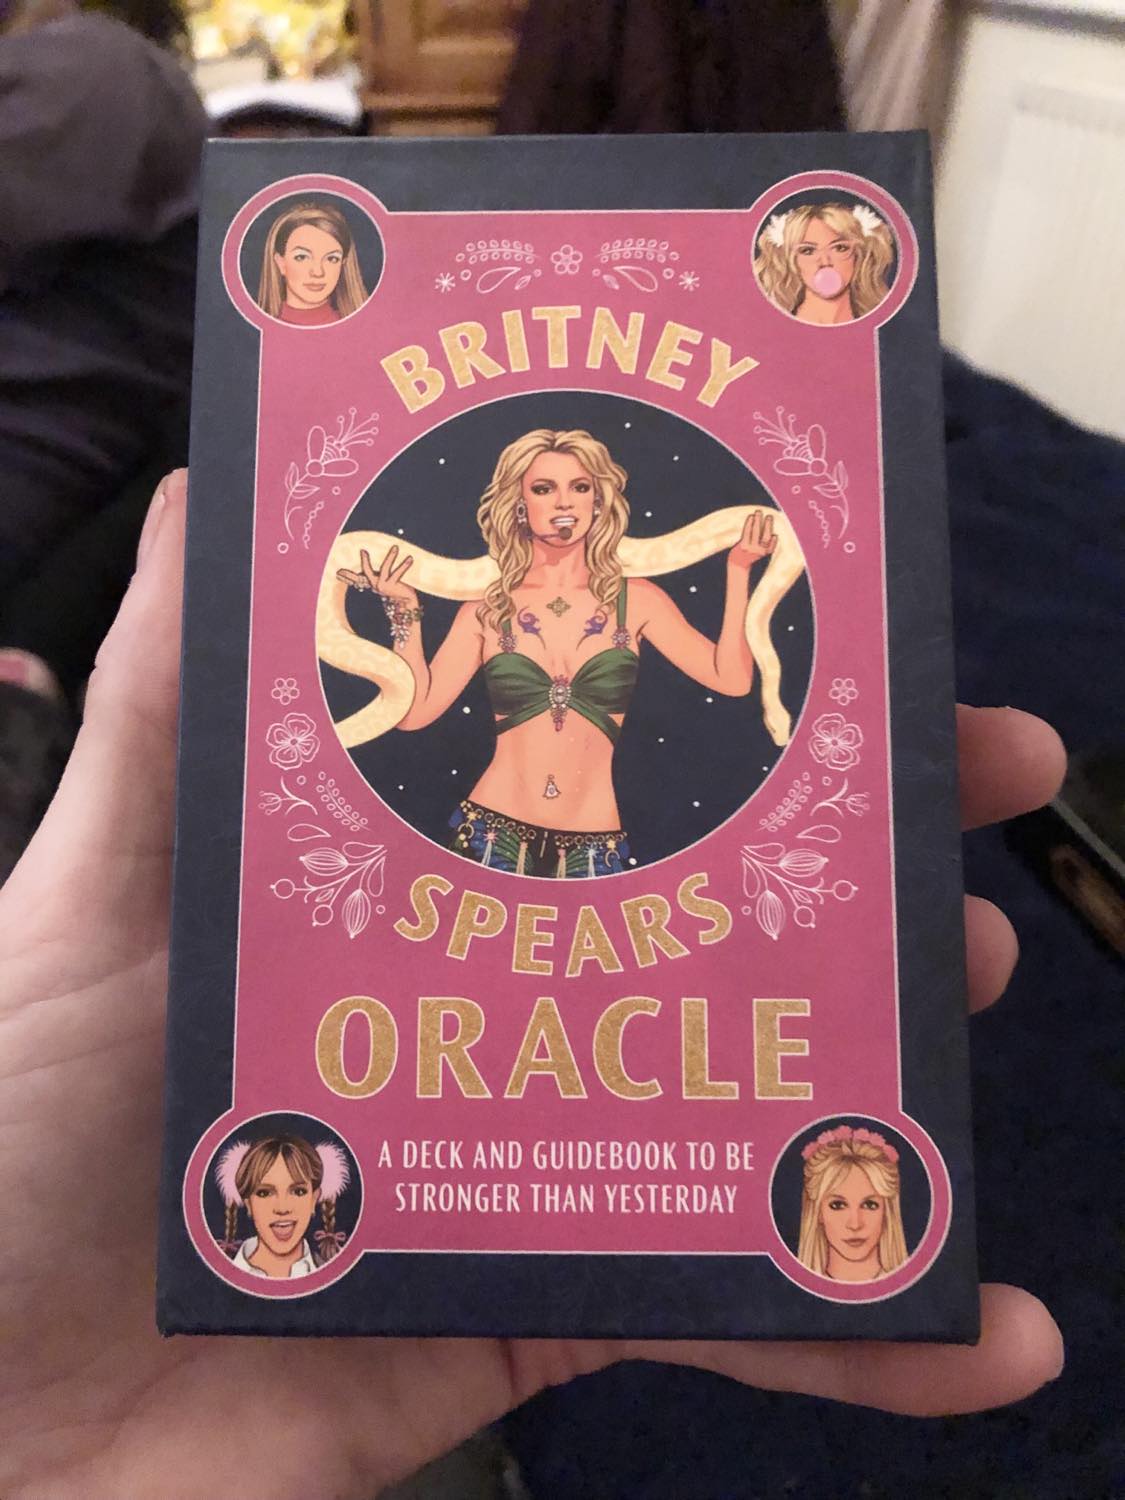 Britney Spears Oracle, which I had to get because it's Britney Spears, I mean c'mon! Kabutroid is just holding it up with her bed and room in the background. The tagline at the bottom of the box calls it a deck and guidebook to be stronger than yesterday. Naturally.